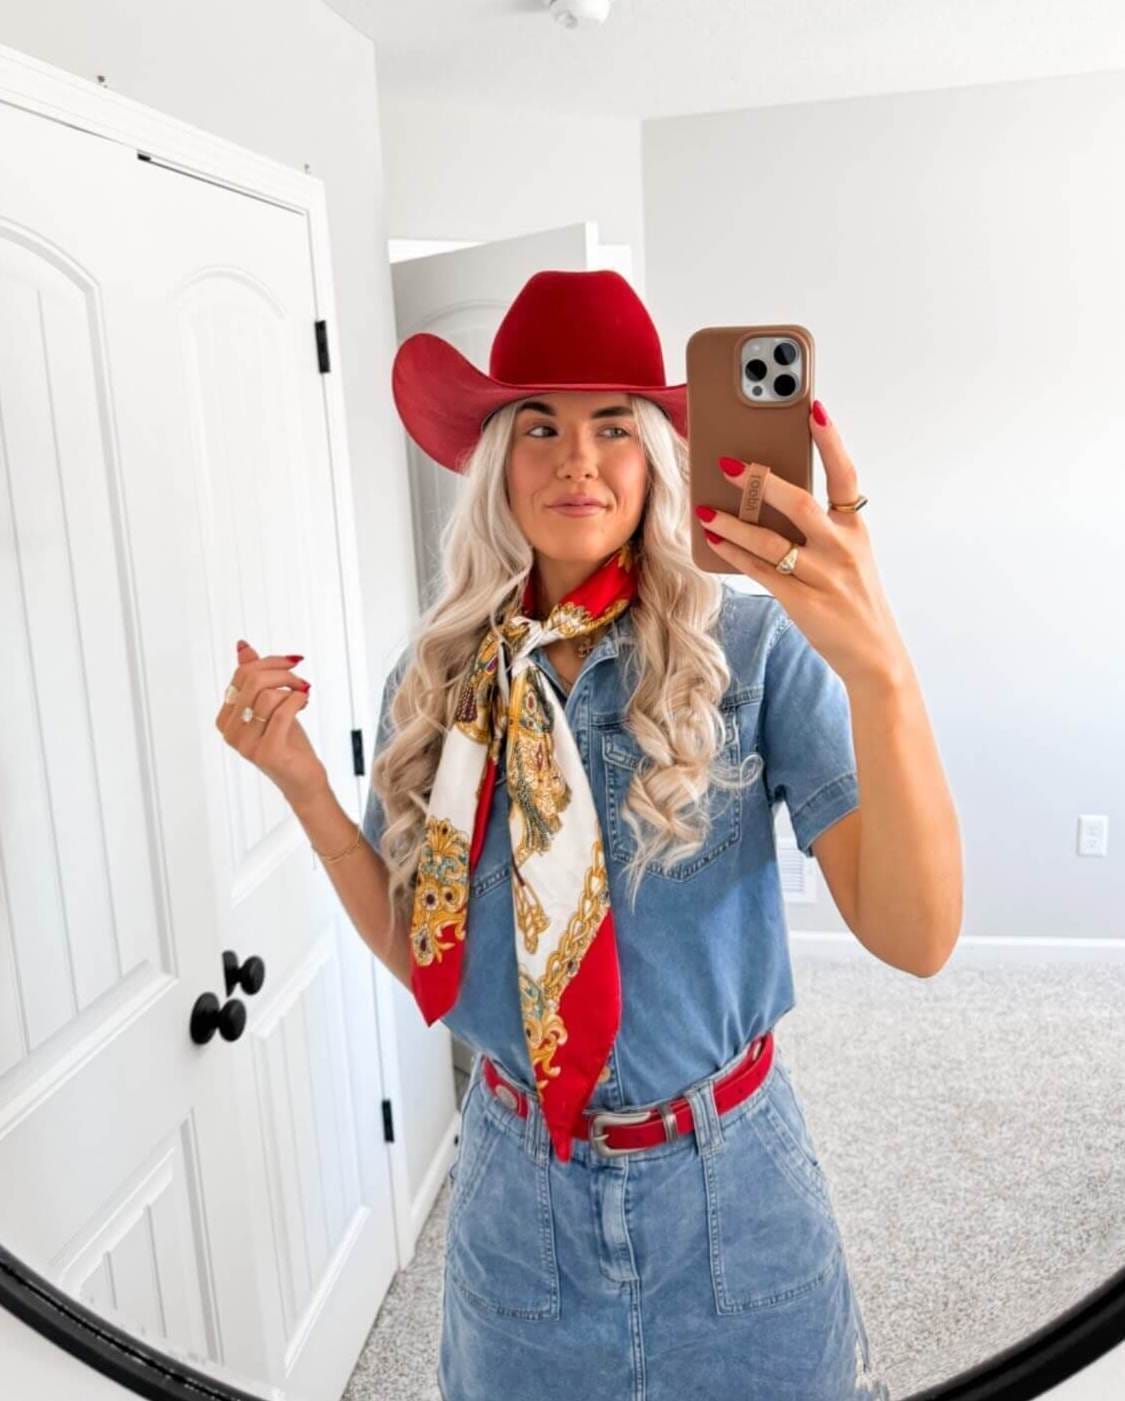 Gentle blonde curls with bright red hat for bold cowgirl style